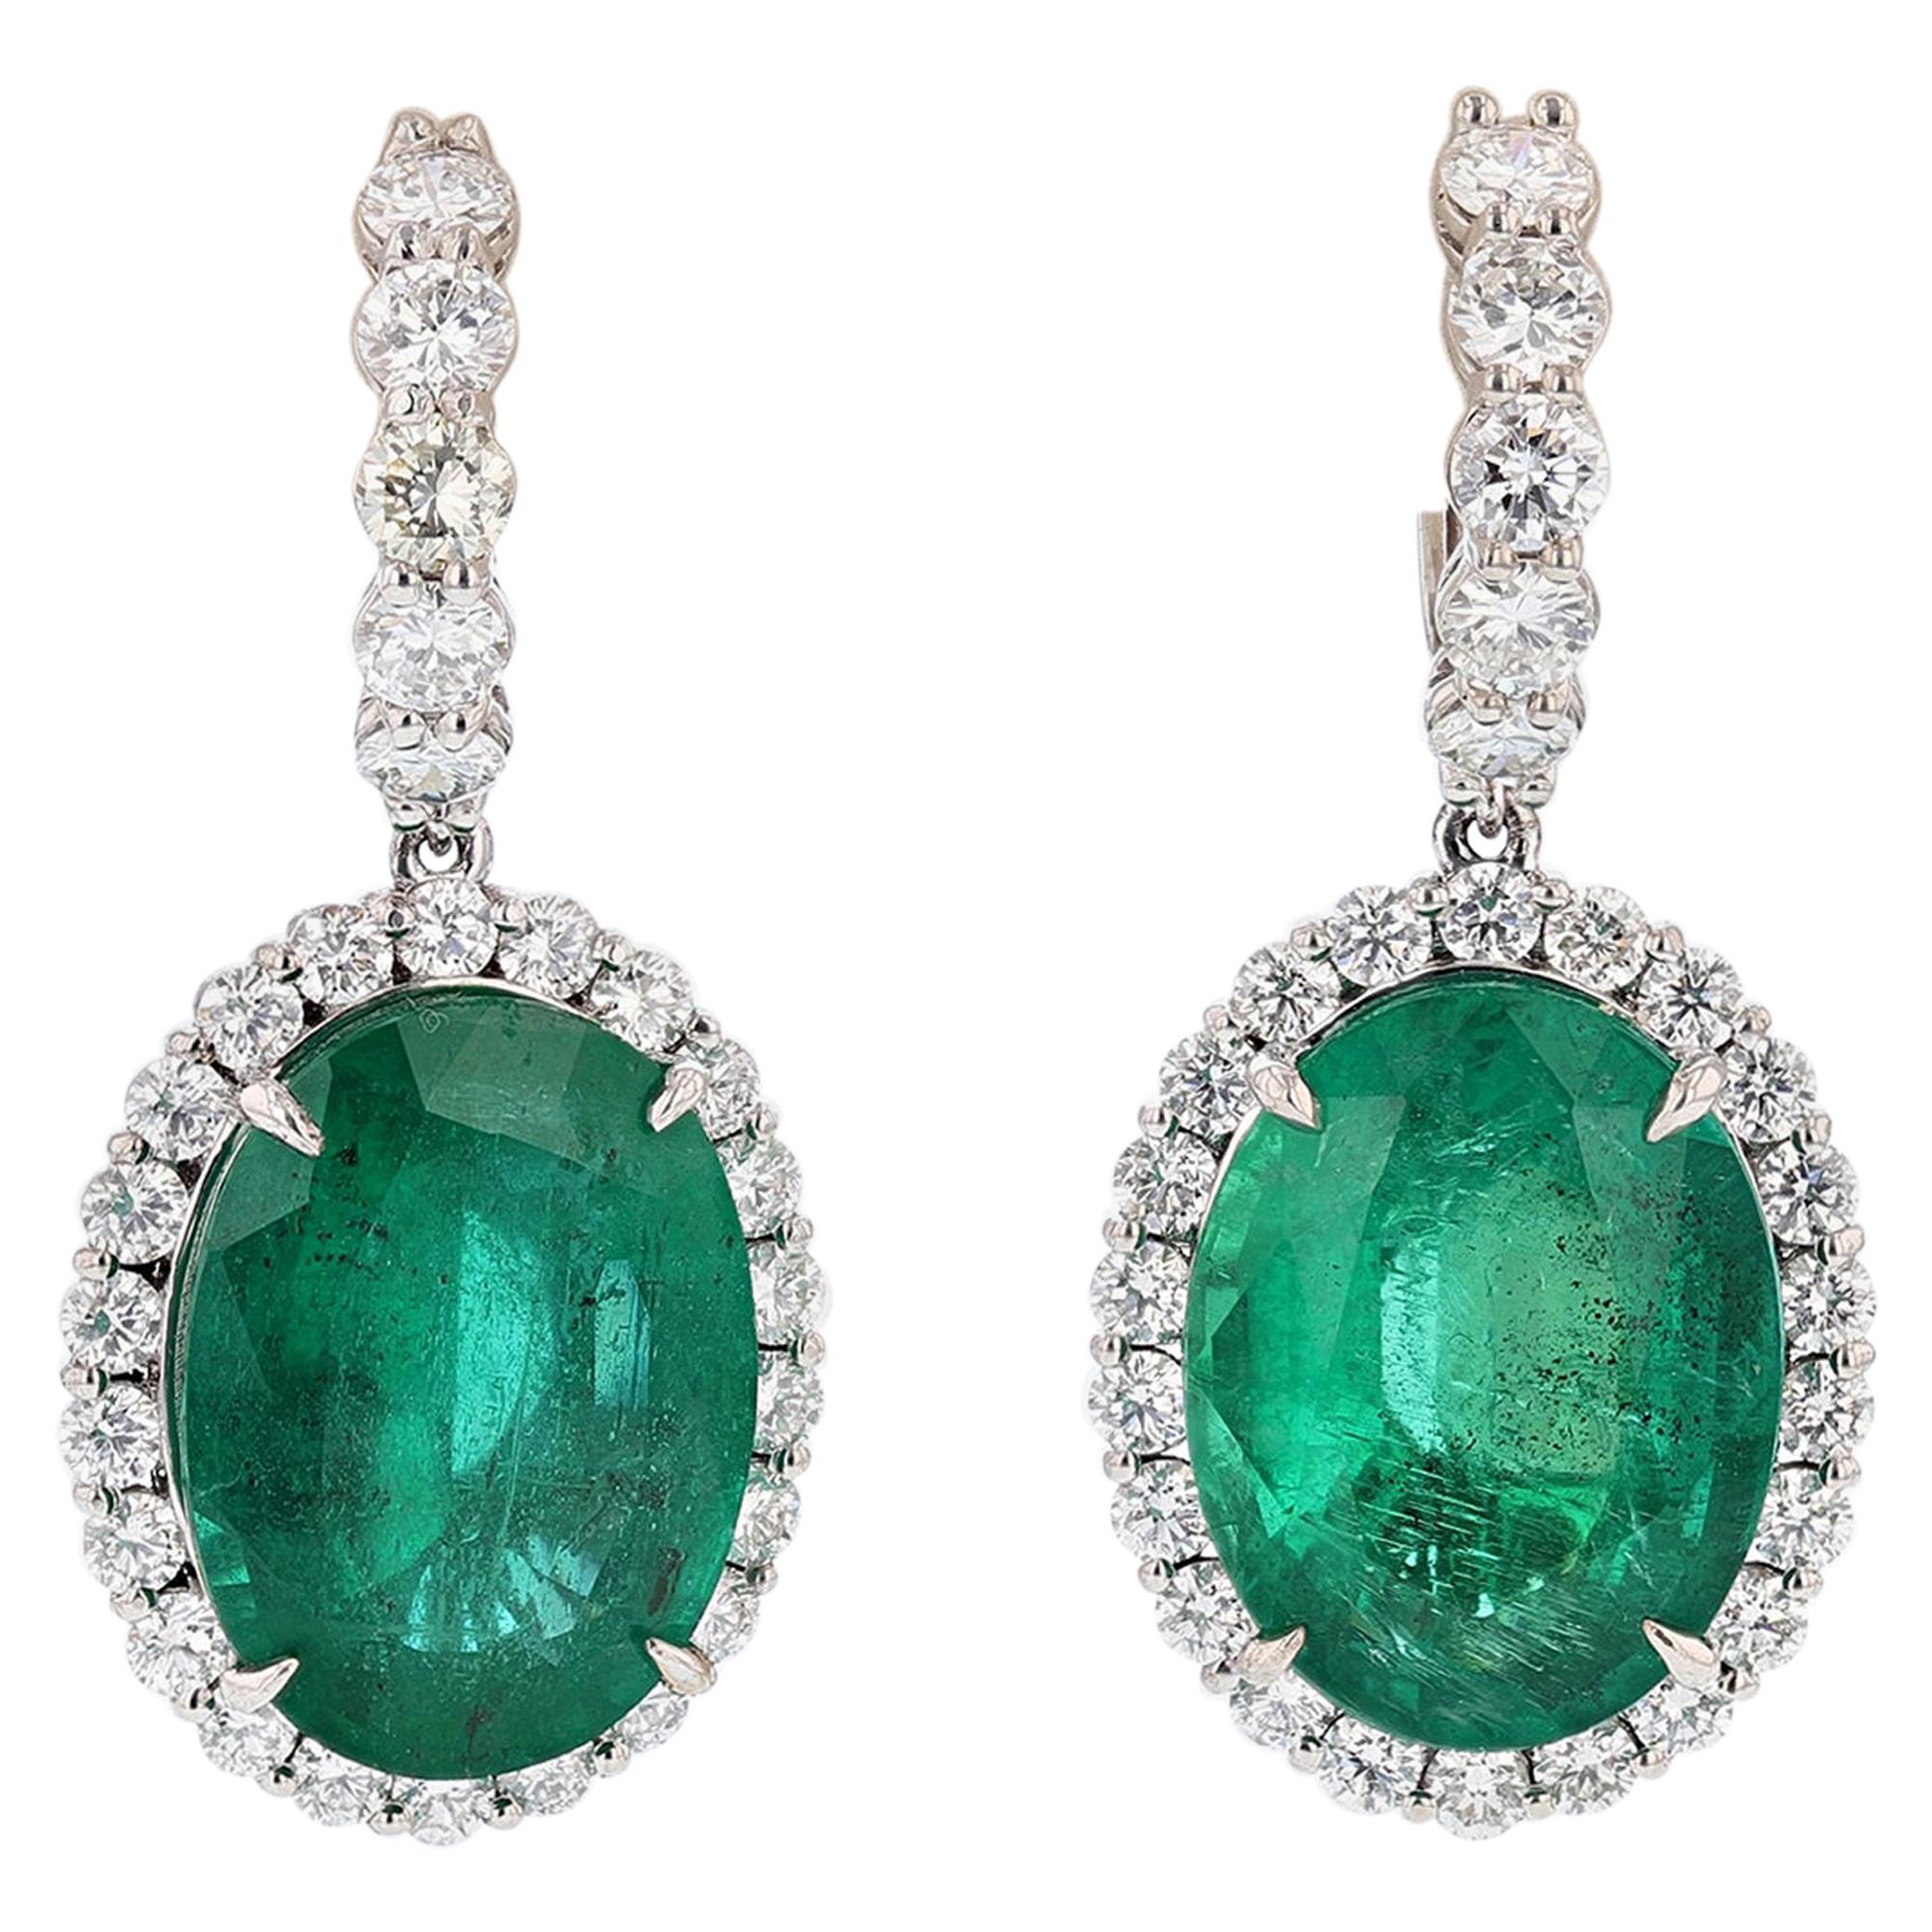 GIA Certified 24.88 Carat Oval Colombian Green Emerald and Diamond Earrings For Sale